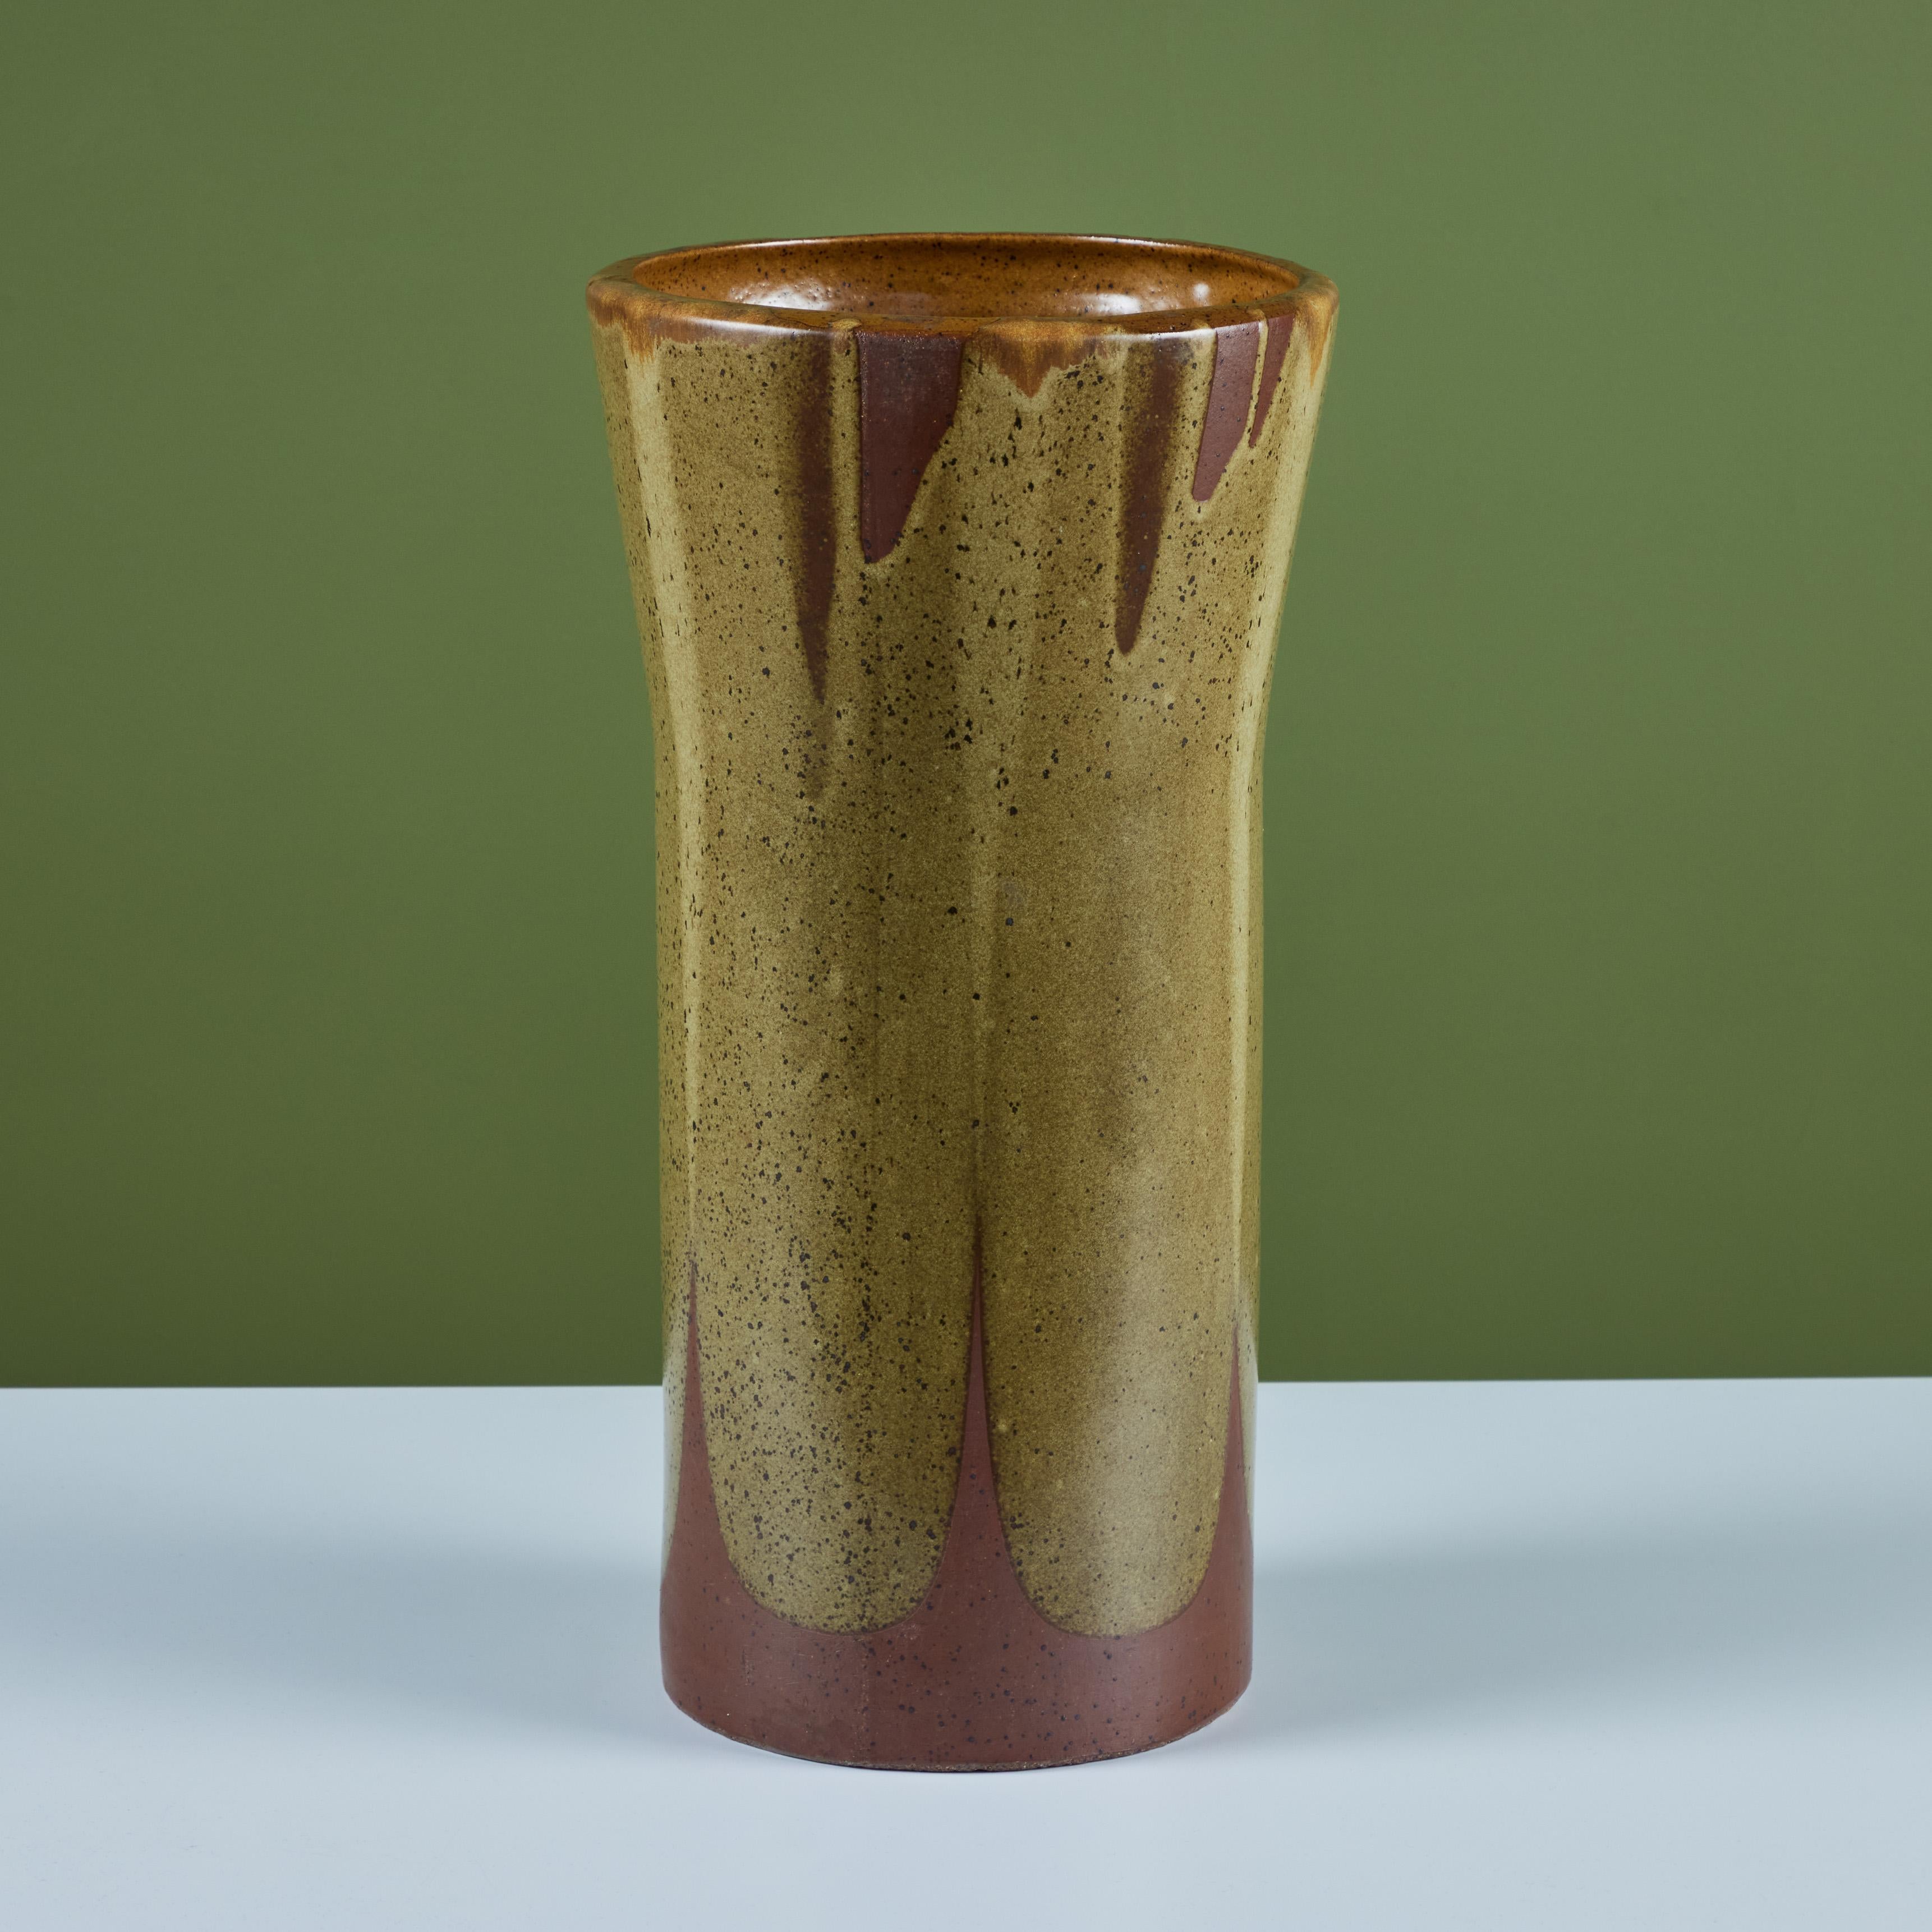 David Cressey Pro/Artisan Flame-Glaze Urn for Architectural Pottery In Excellent Condition For Sale In Los Angeles, CA